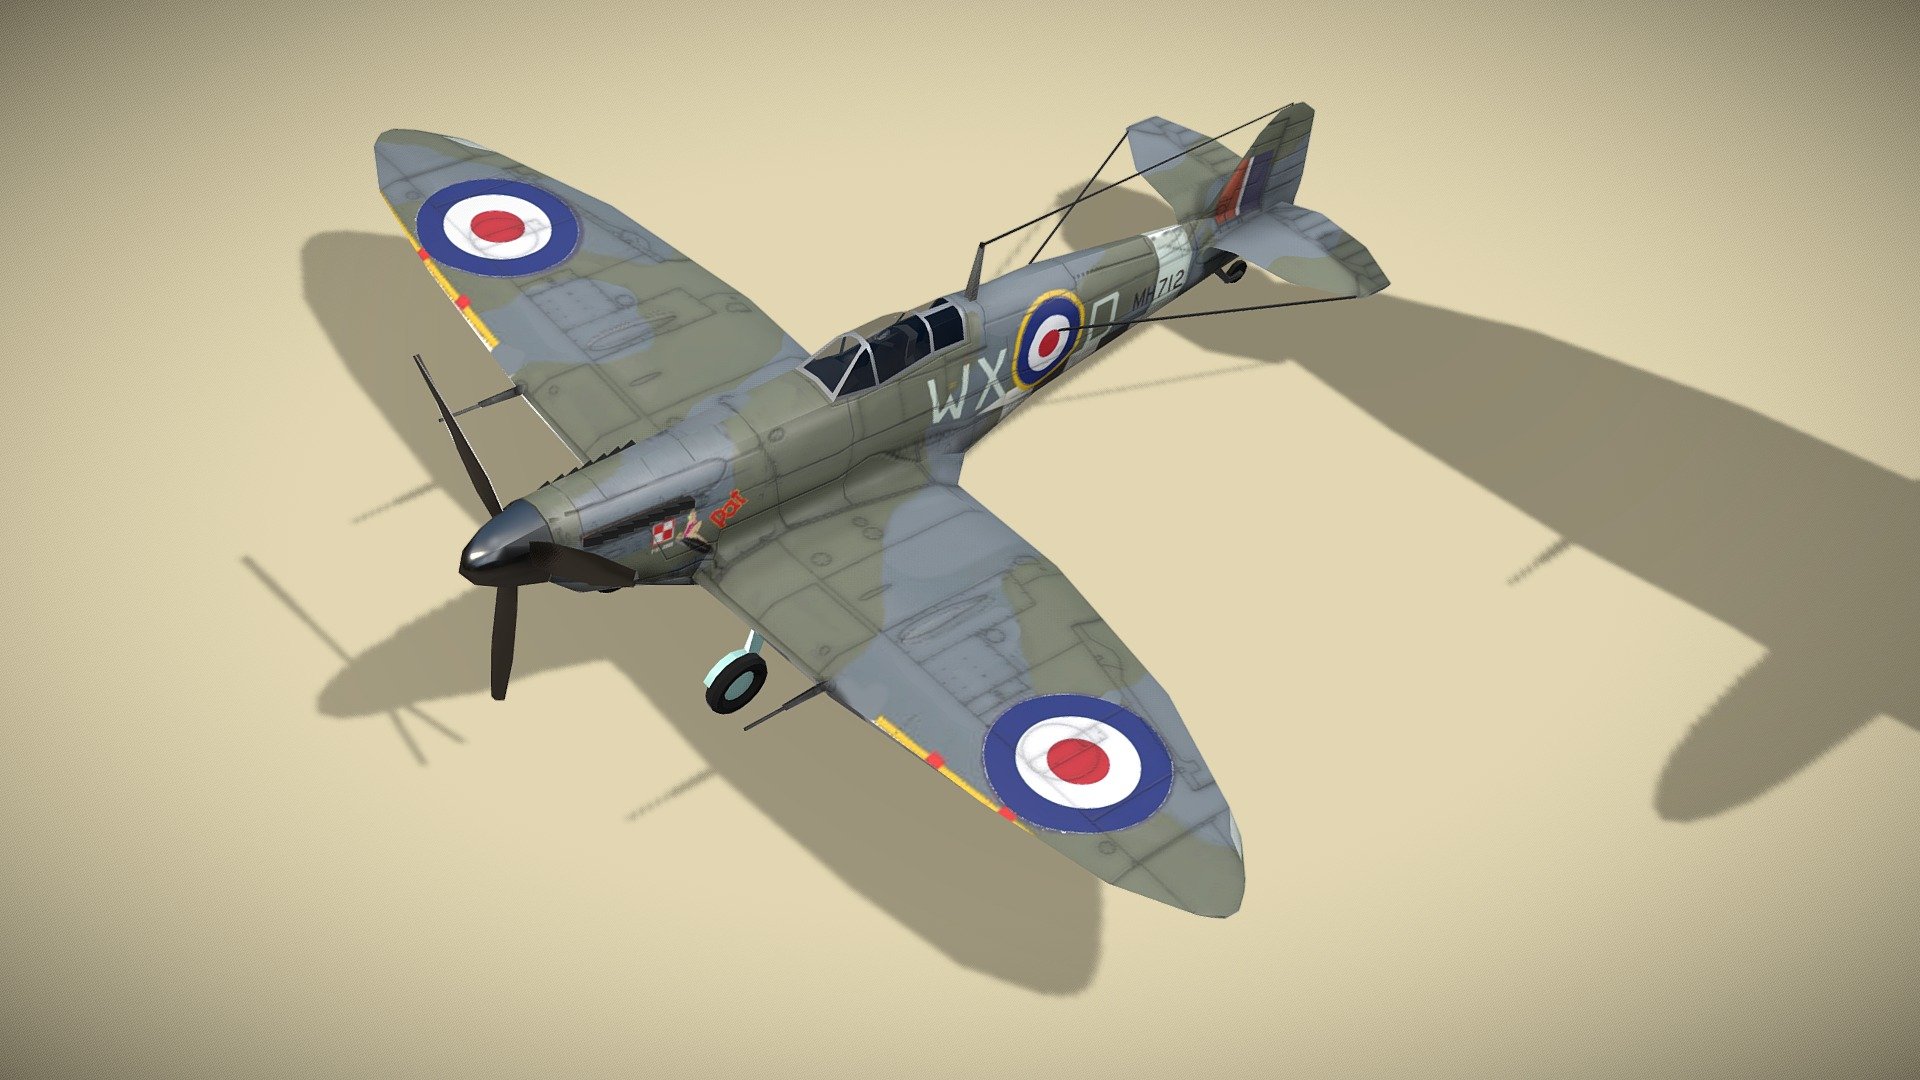 Supermarine Spitfire

Lowpoly model of british fighter plane.



Supermarine Spitfire is a British single-seat fighter aircraft that was used by the Royal Air Force and other Allied countries before, during, and after World War II. Many variants of the Spitfire were built, using several wing configurations. It was also the only British fighter produced continuously throughout the war.
Spitfire was designed as a short-range, high-performance interceptor aircraft by R. J. Mitchell. Mitchell pushed the Spitfire's distinctive elliptical wing with innovative sunken rivets to have the thinnest possible cross-section, helping give the aircraft a higher top speed than several contemporary fighters, including the Hawker Hurricane.



1 standing version with wheels and 2 flying versions with trails, afterburner, pilot and armament.

Model has bump map, roughness map and 3 x diffuse textures.



Check also my other aircrafts and cars 3d model